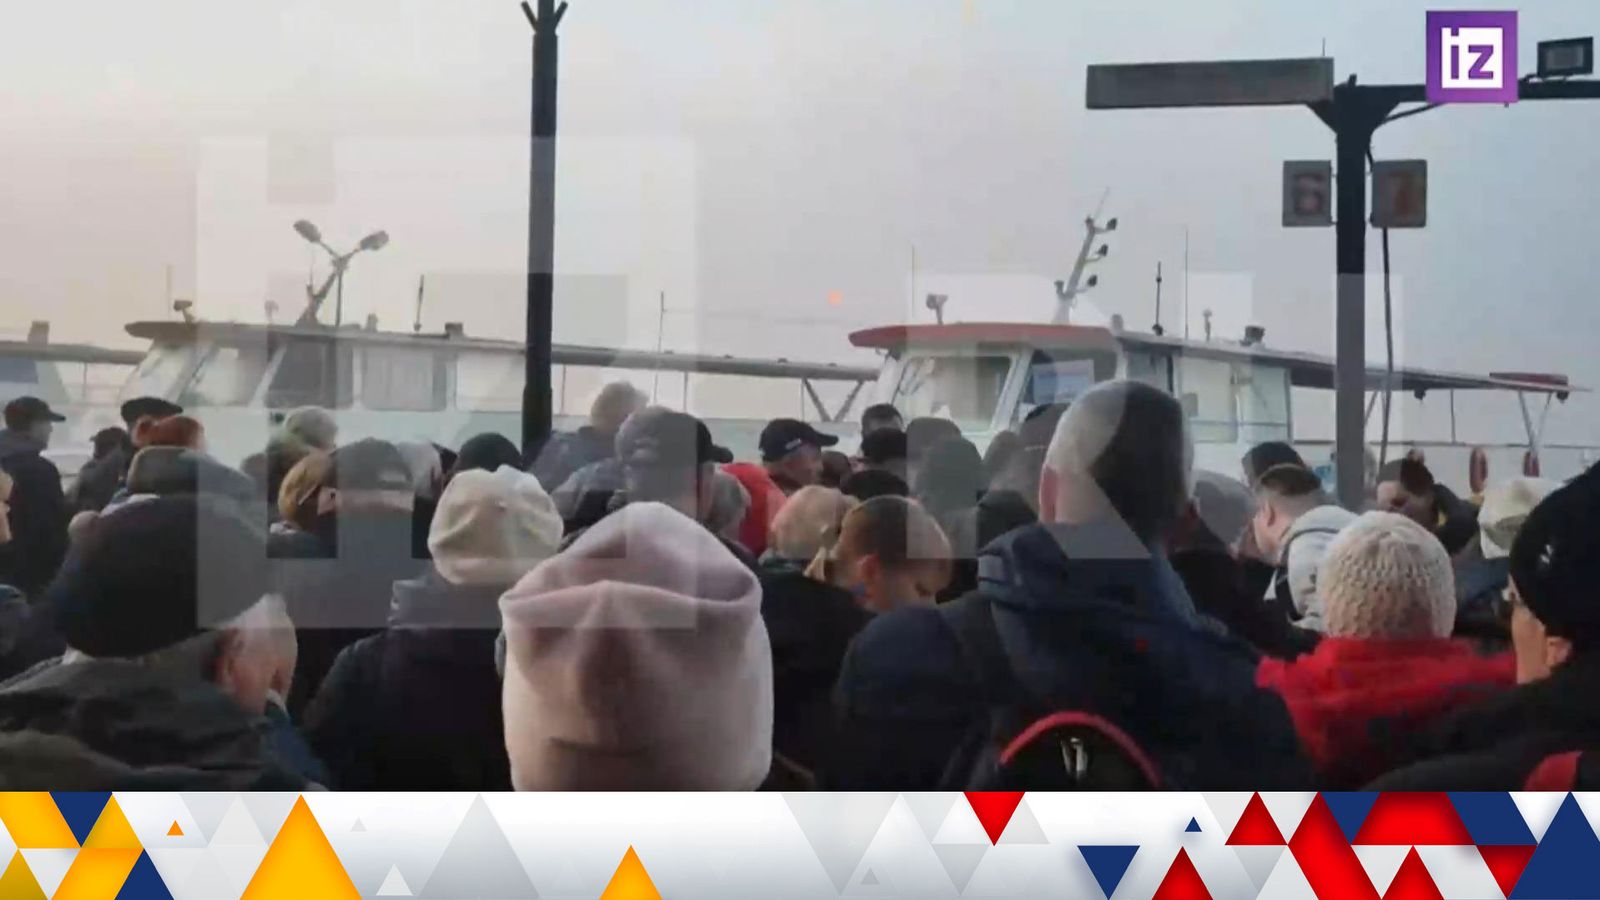 kherson-residents-evacuate-by-boat-as-putin-declares-martial-law-in-four-occupied-regions-of-ukraine